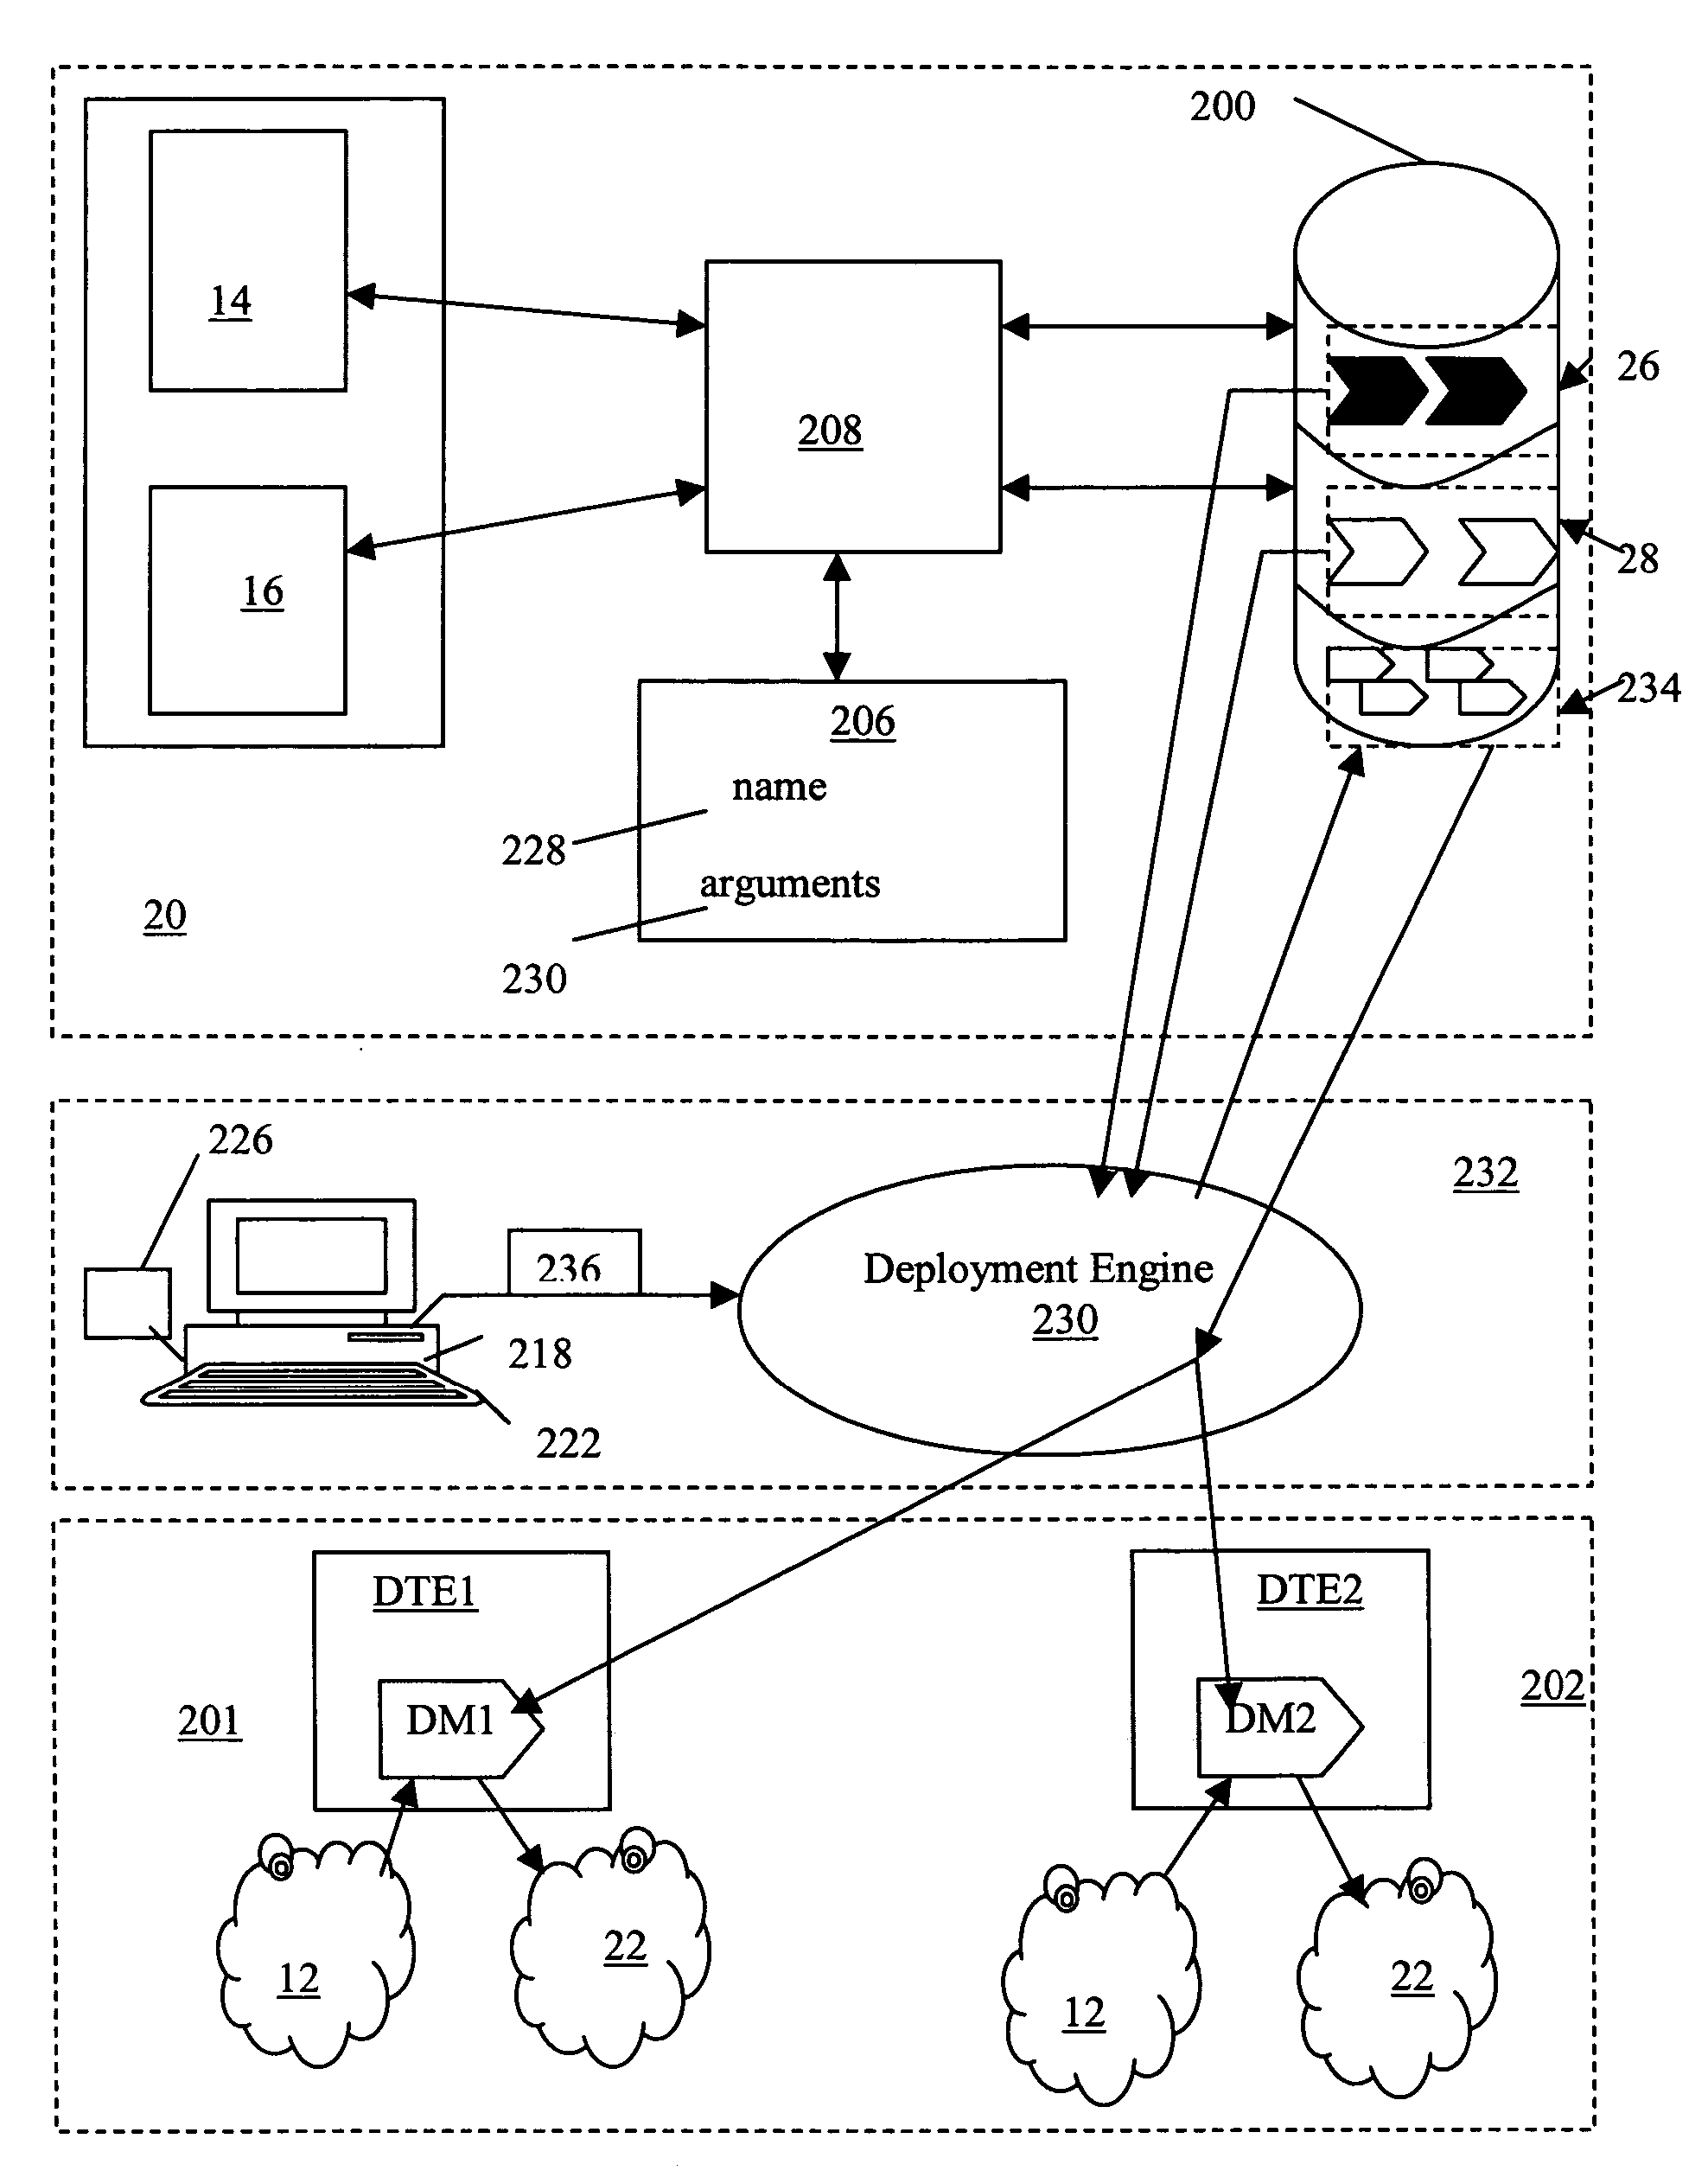 Integrated visual and language-based method for reusable data transformations